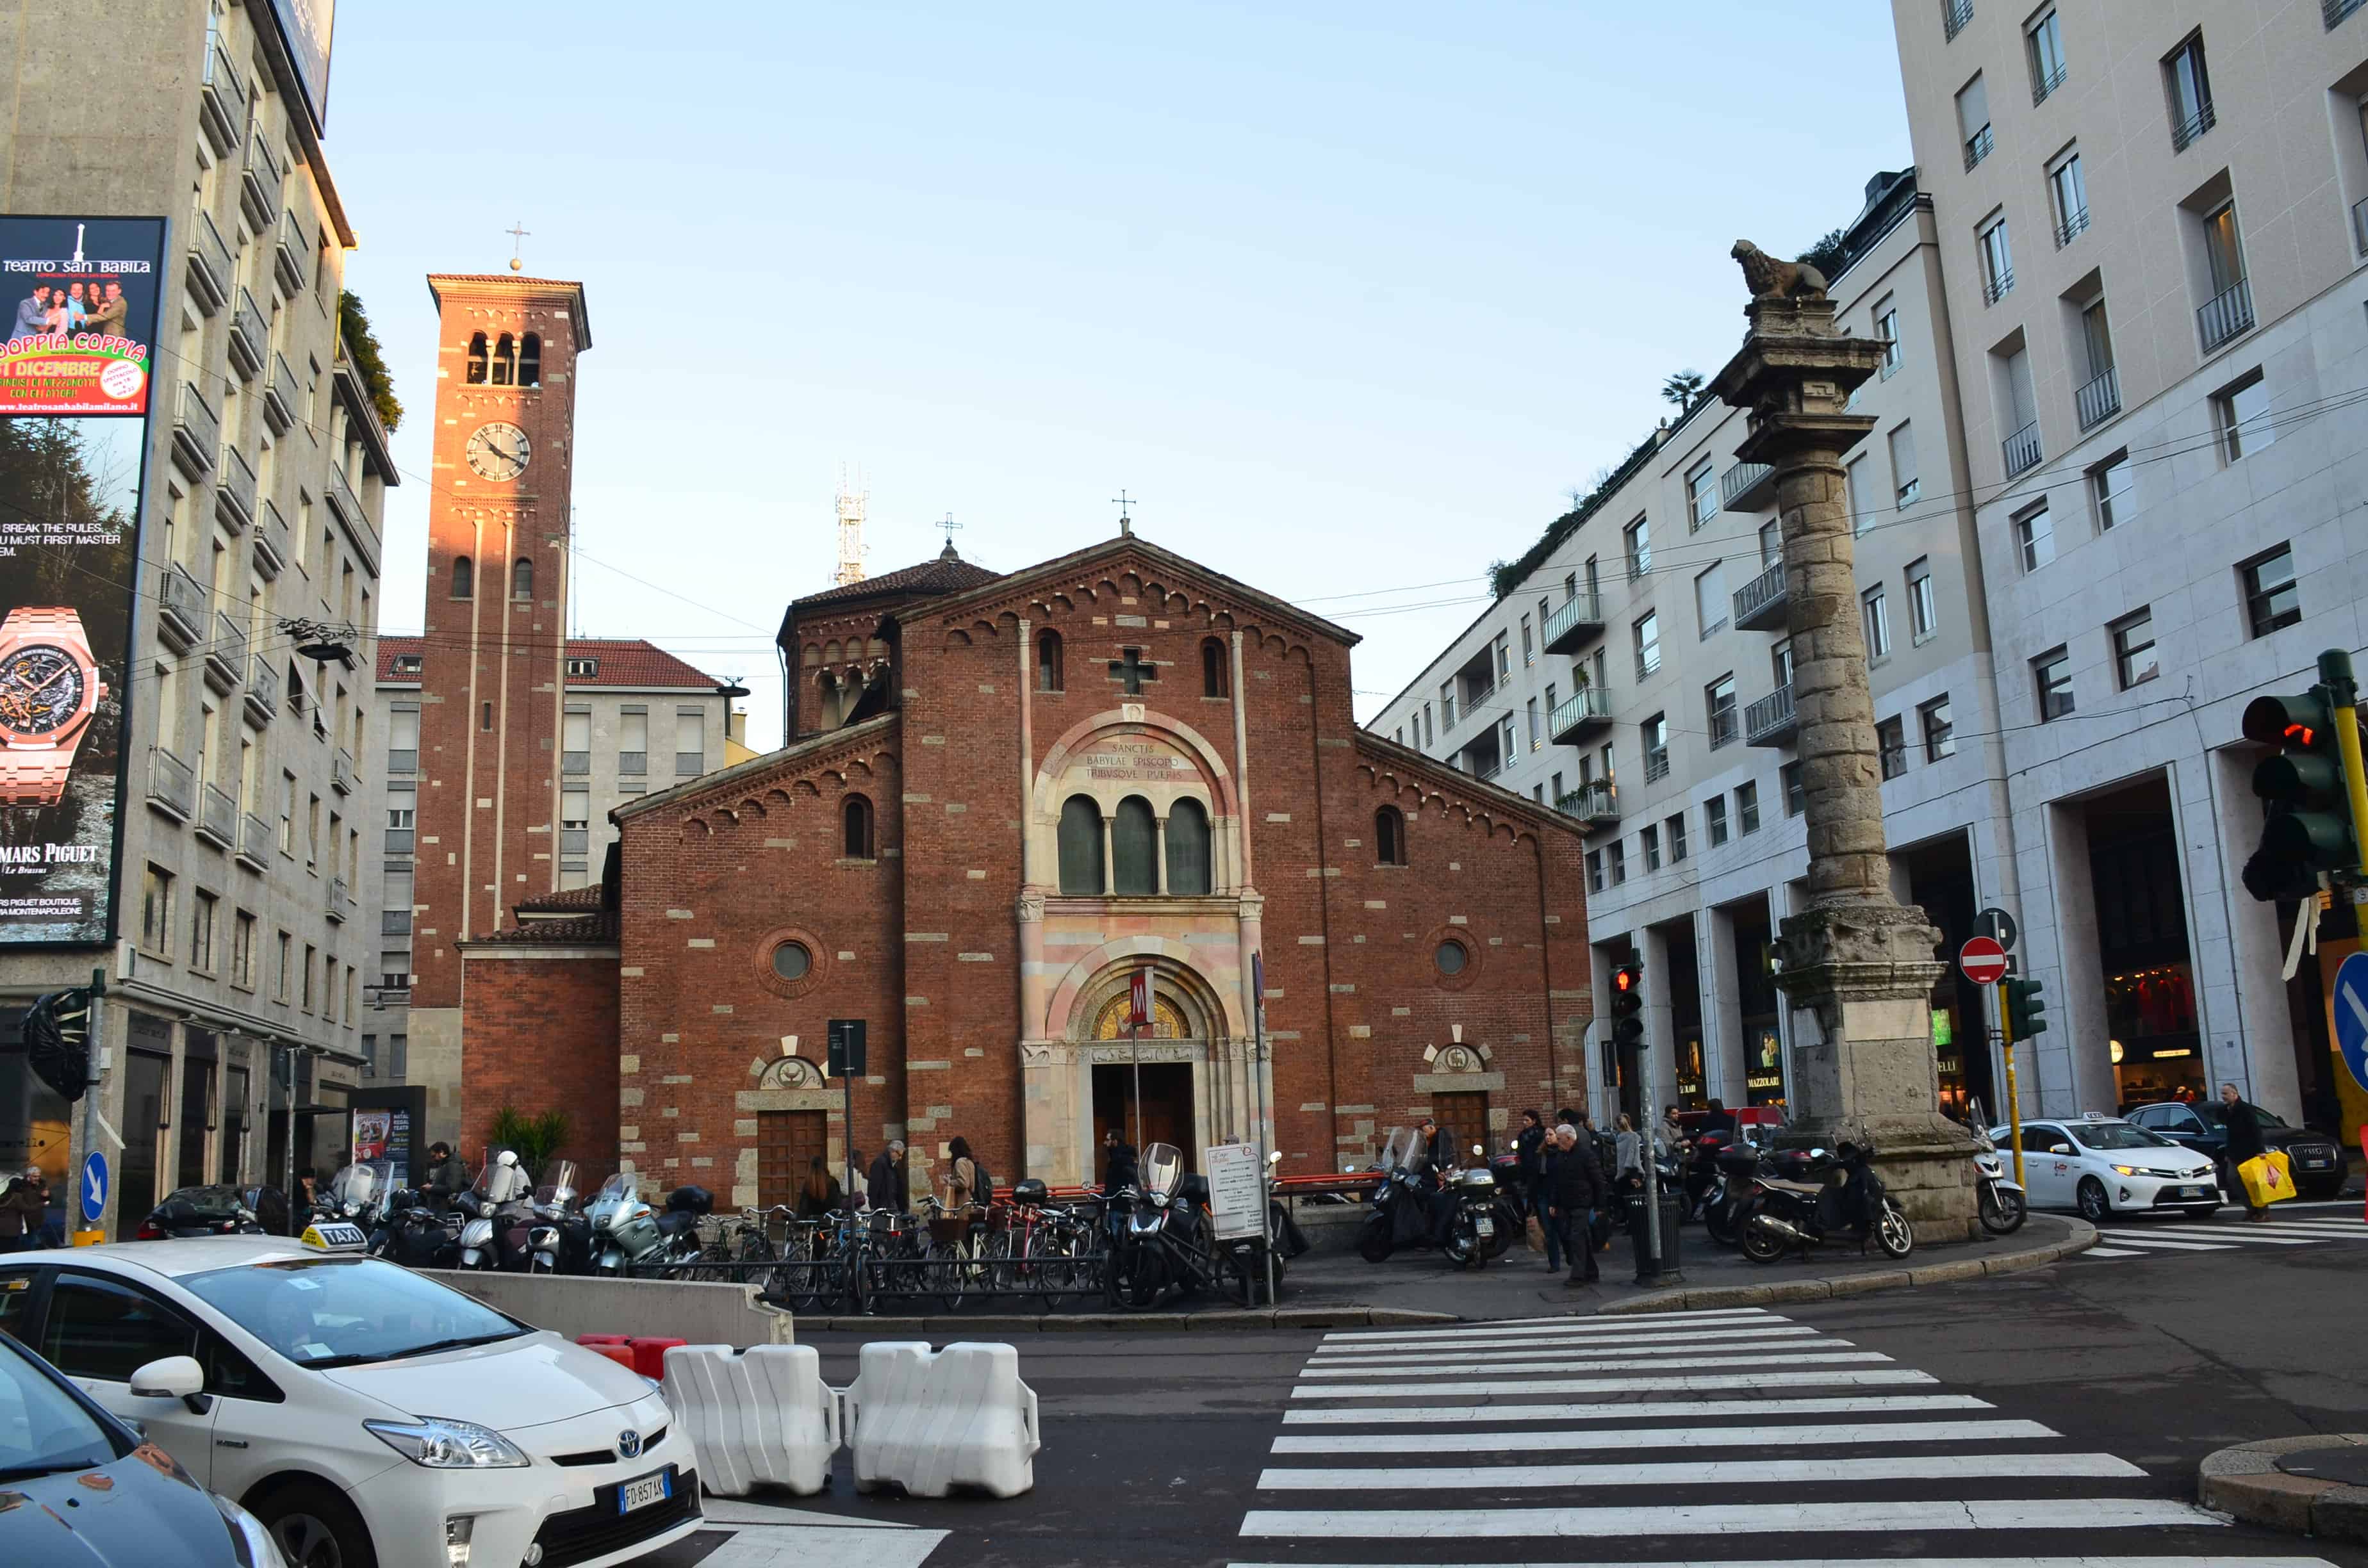 Basilica of San Babila with the Lion Column out front in Milan, Italy